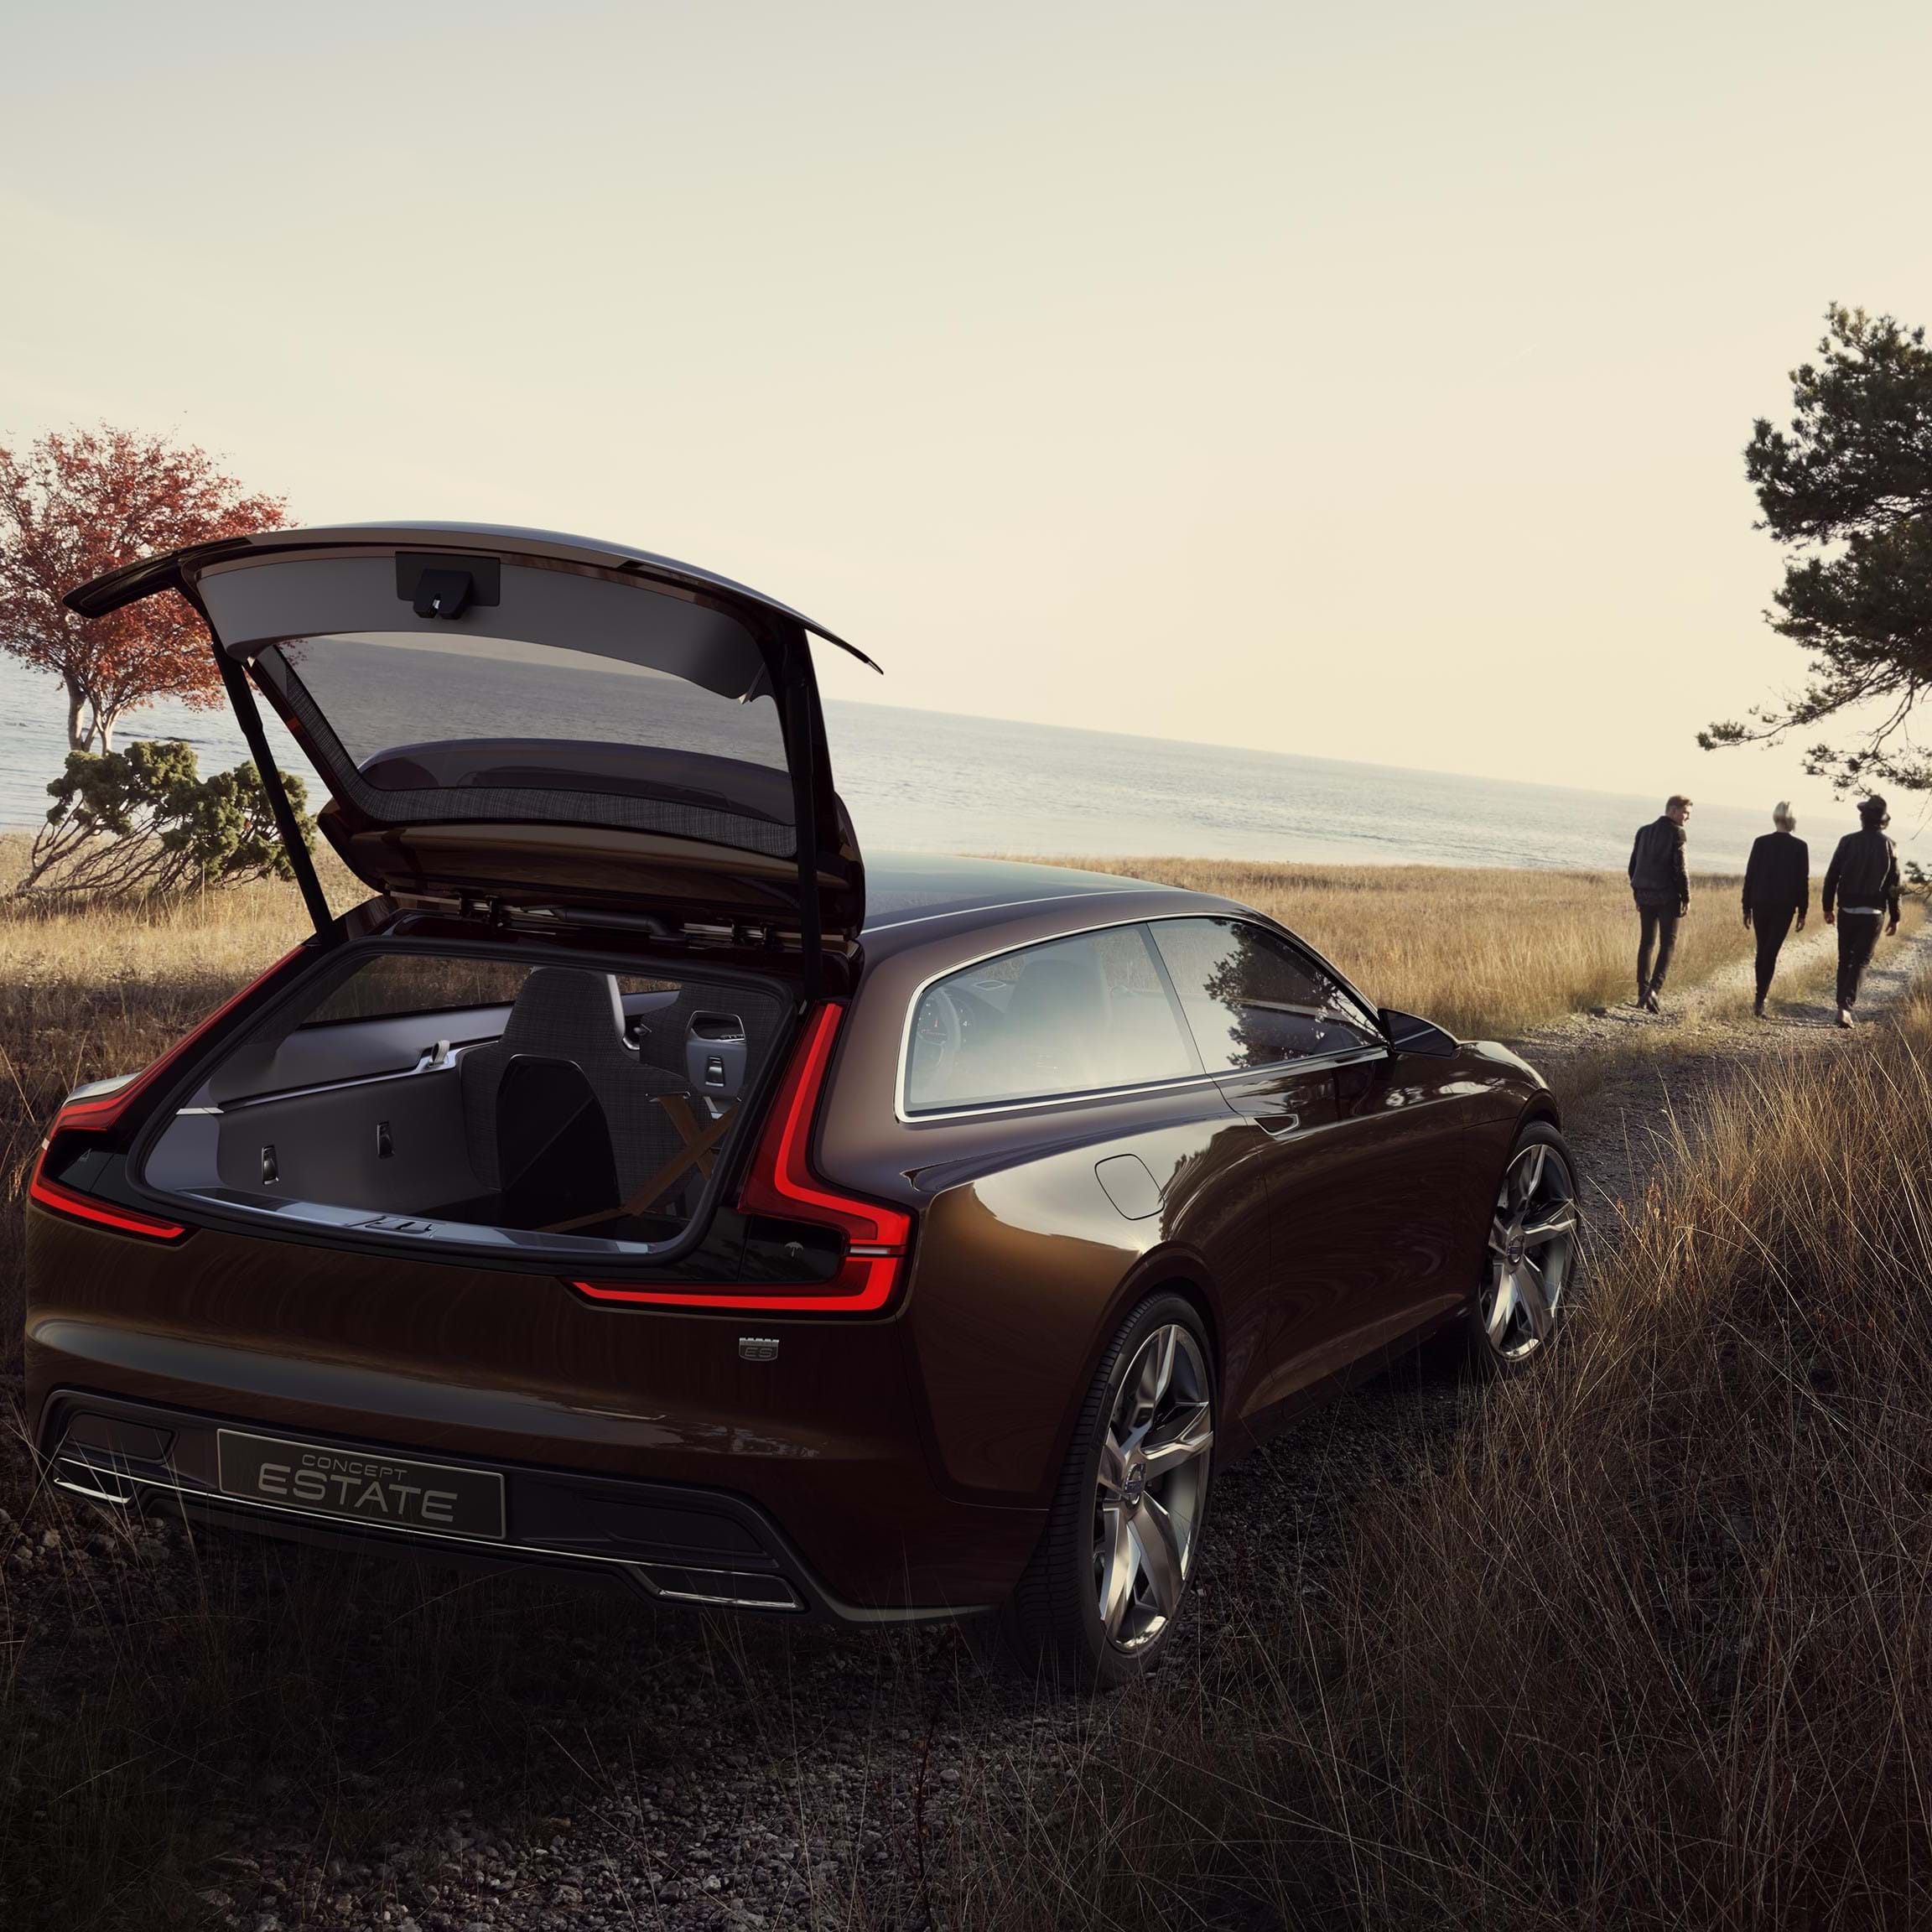 Volvo Concept Estate with open luggage space door parked on country track